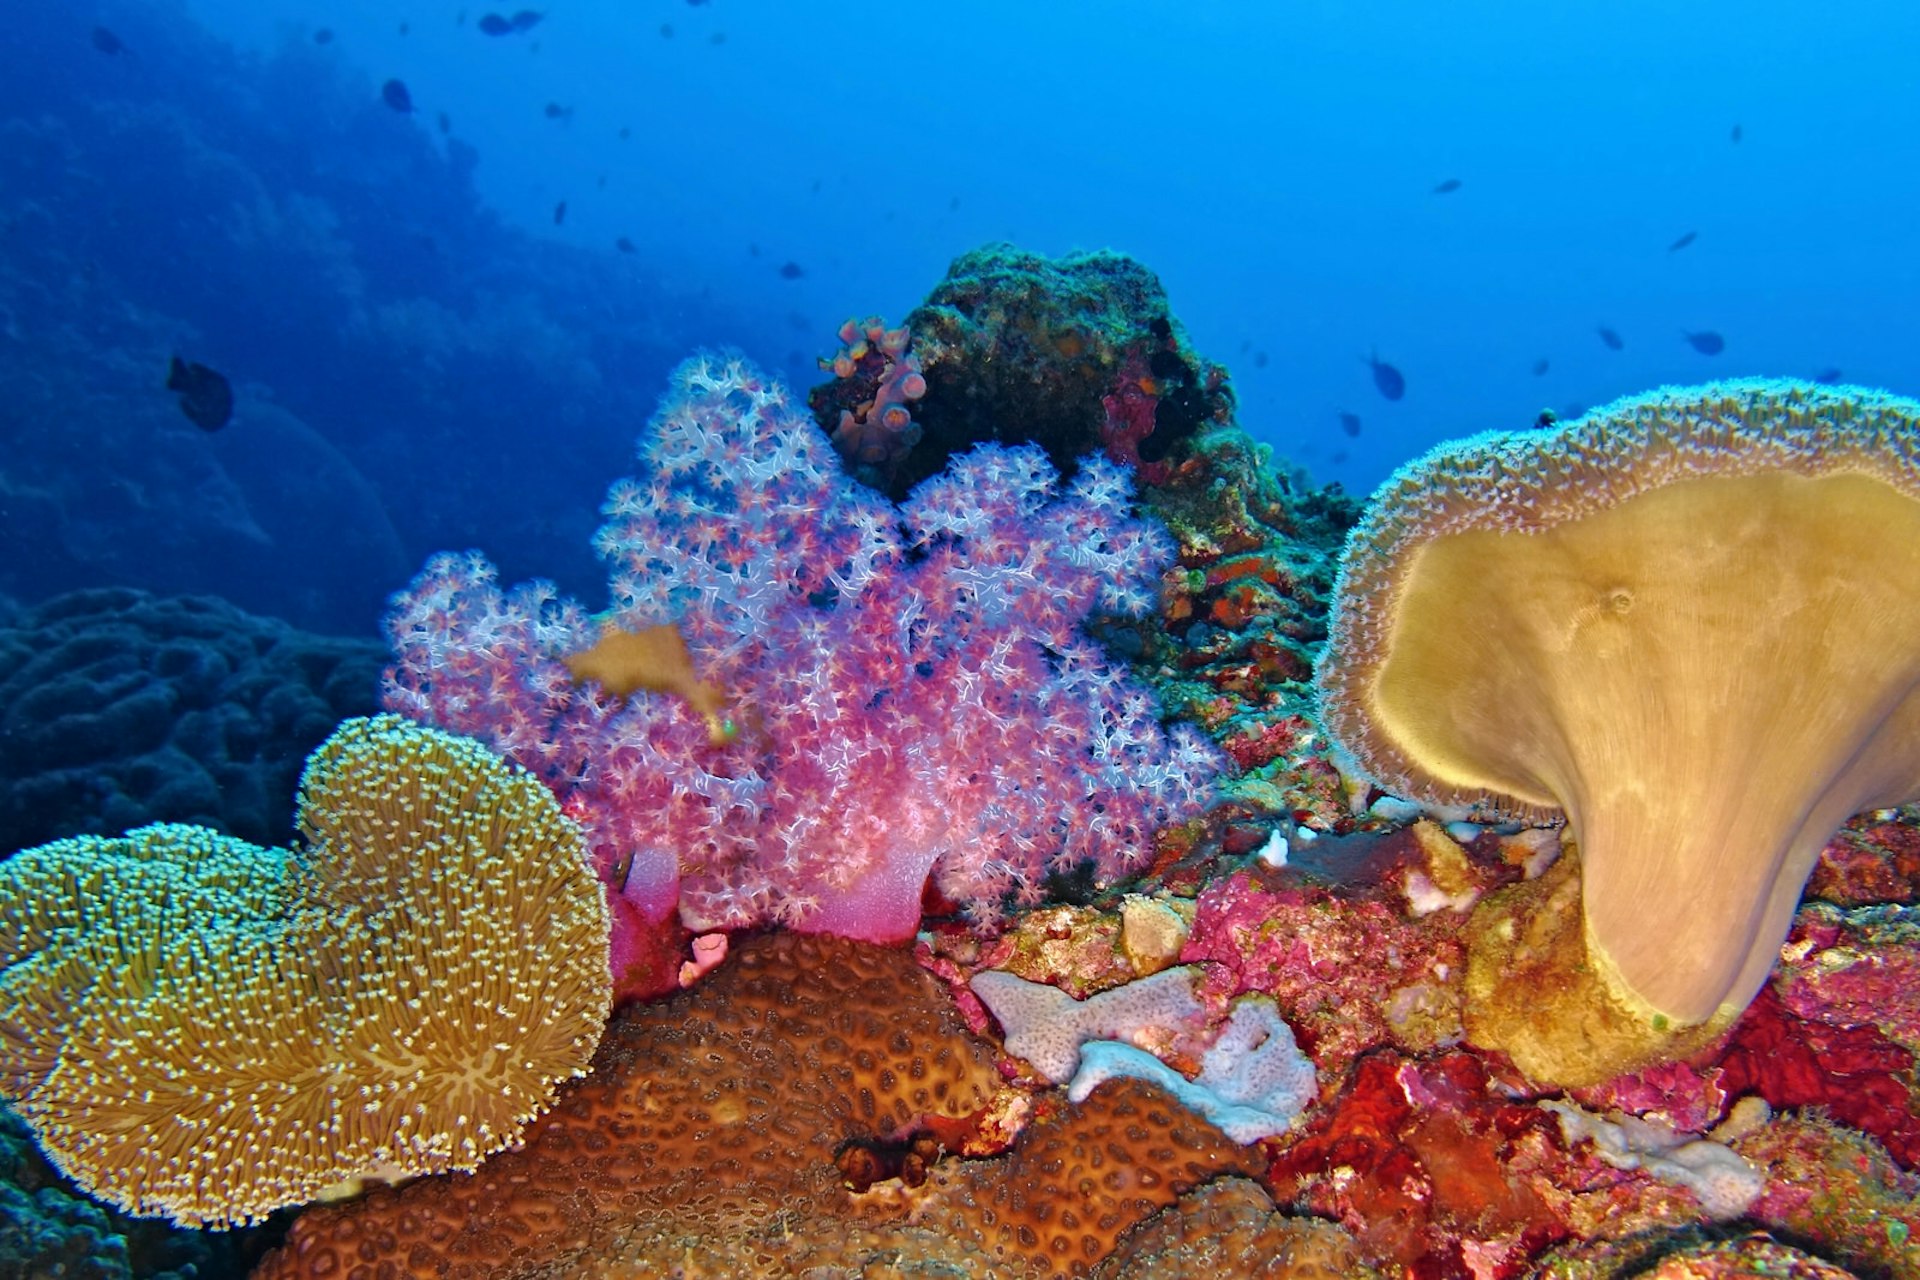 A close up shot of an underwater, colourful reef with a variety of wildlife